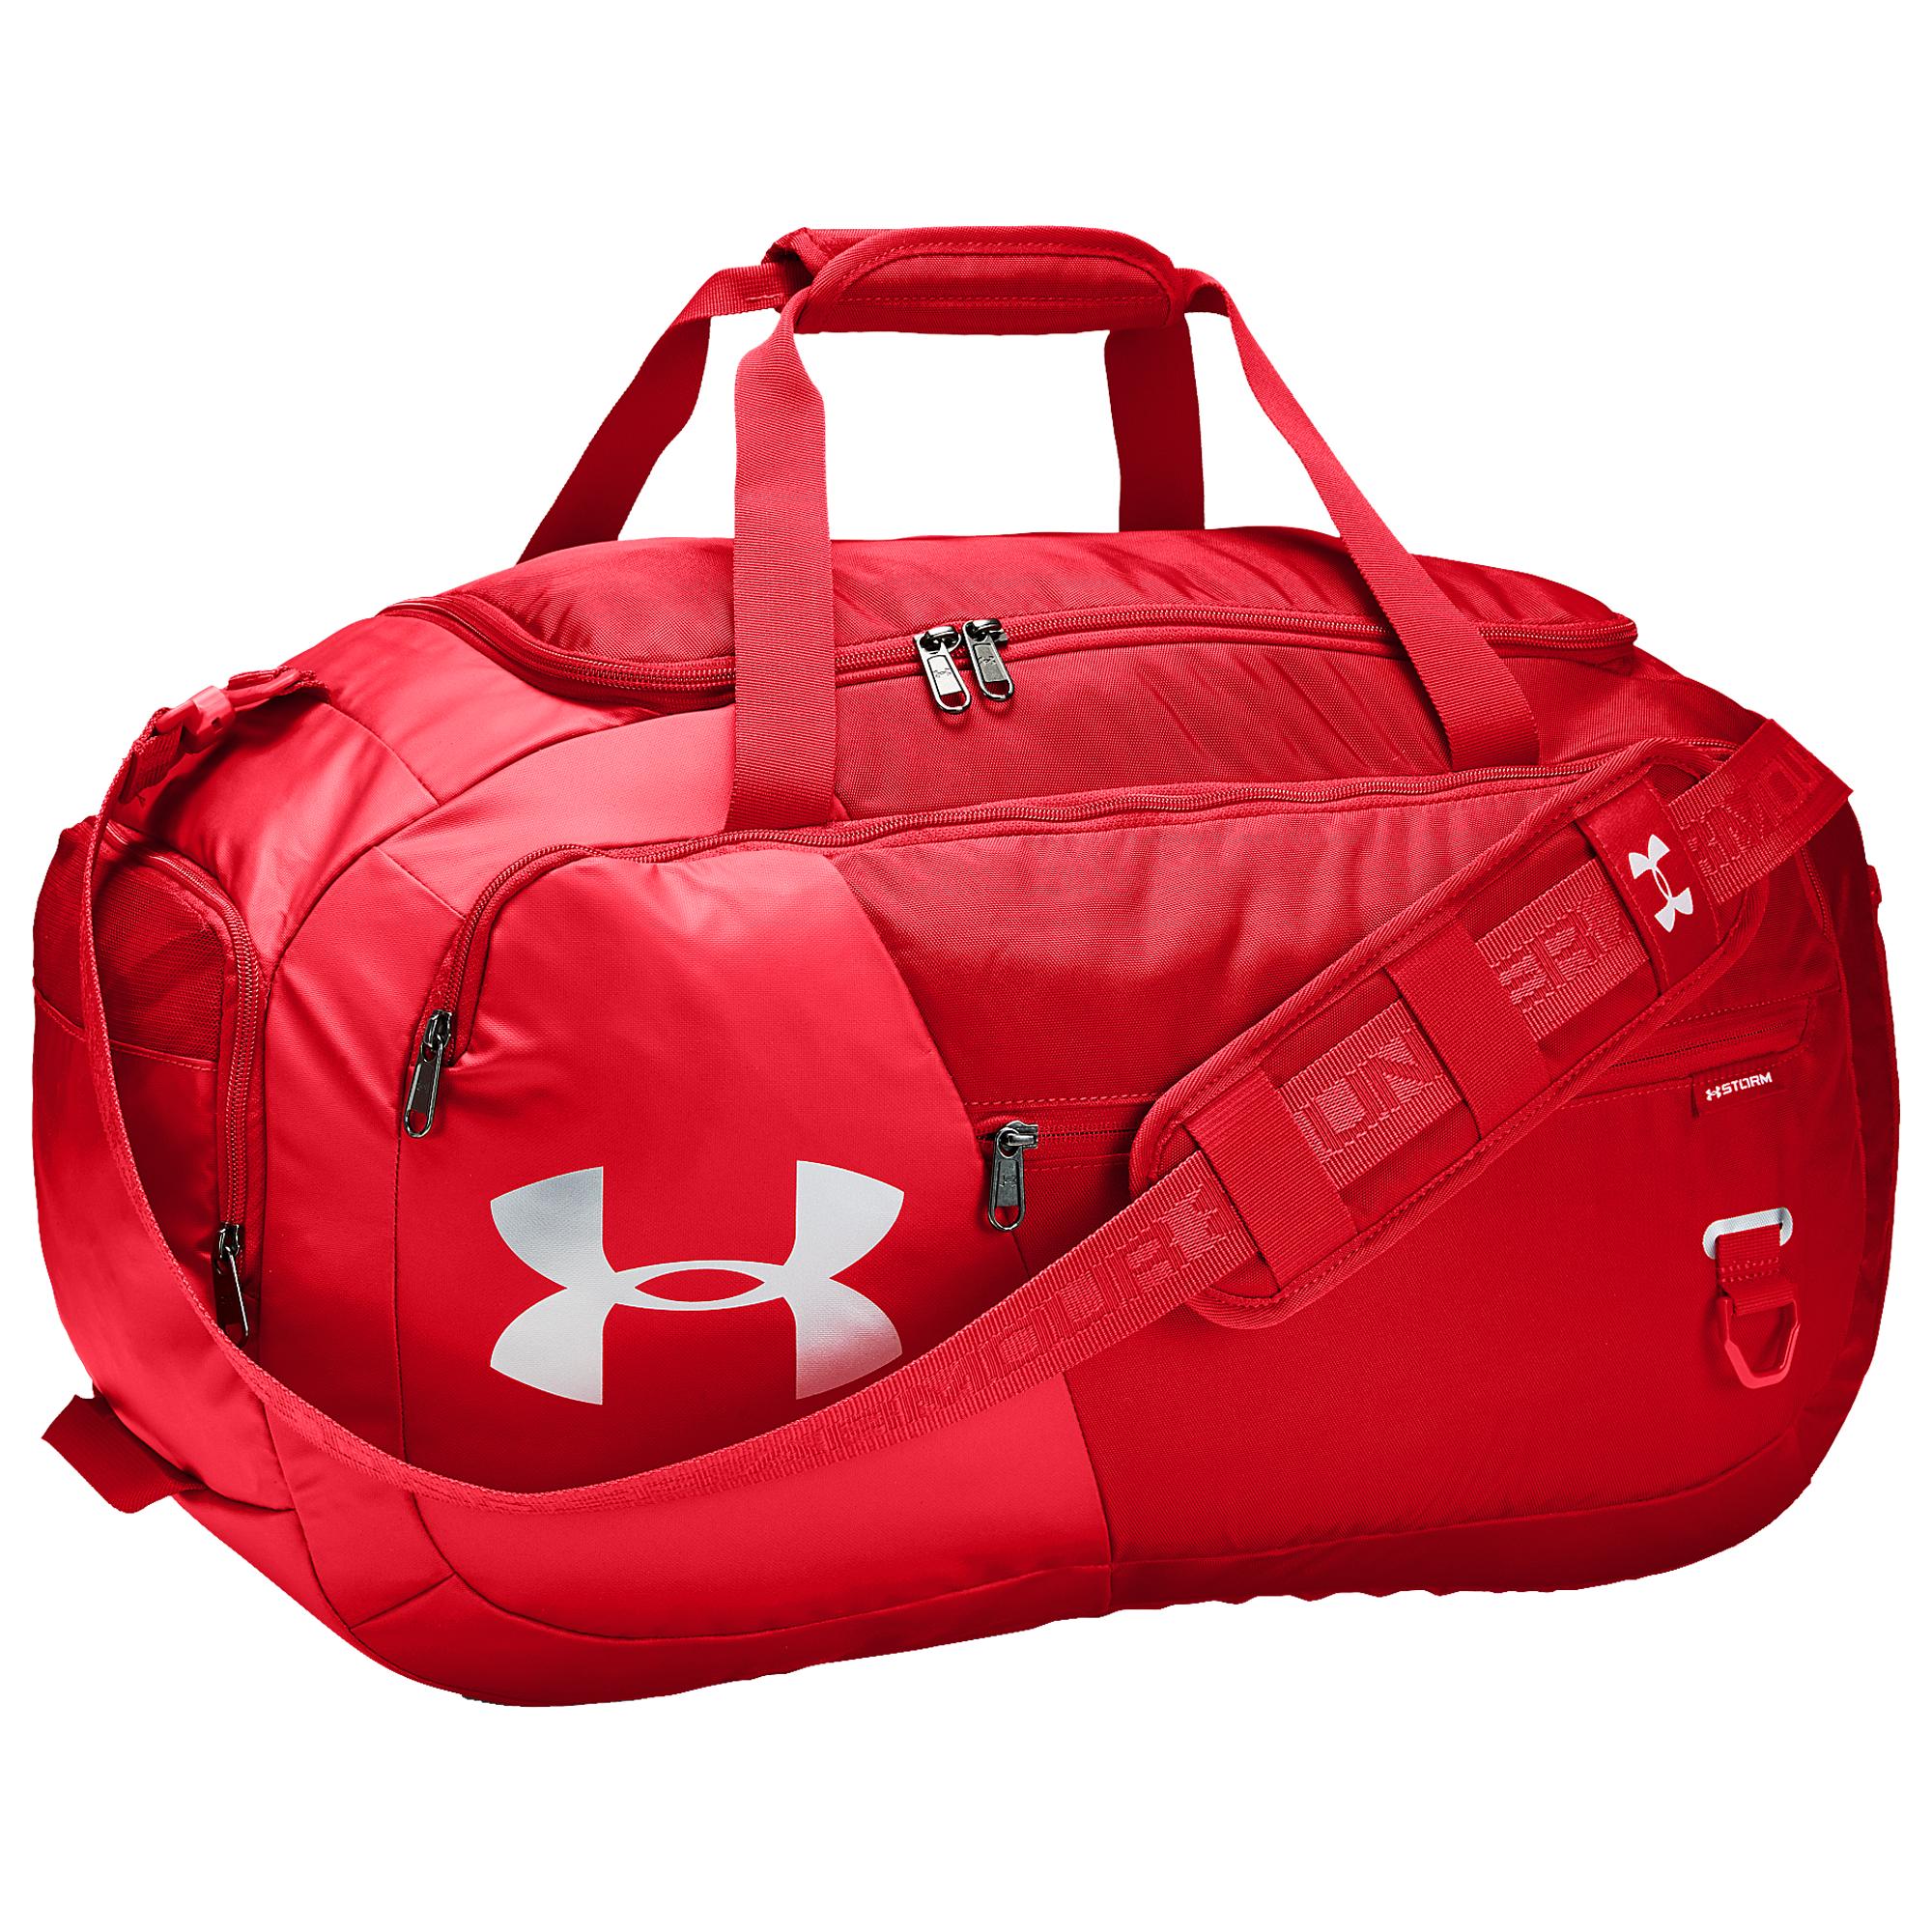 Under Armour Undeniable Duffel 4.0 Small Duffle Bag in Red for Men - Lyst